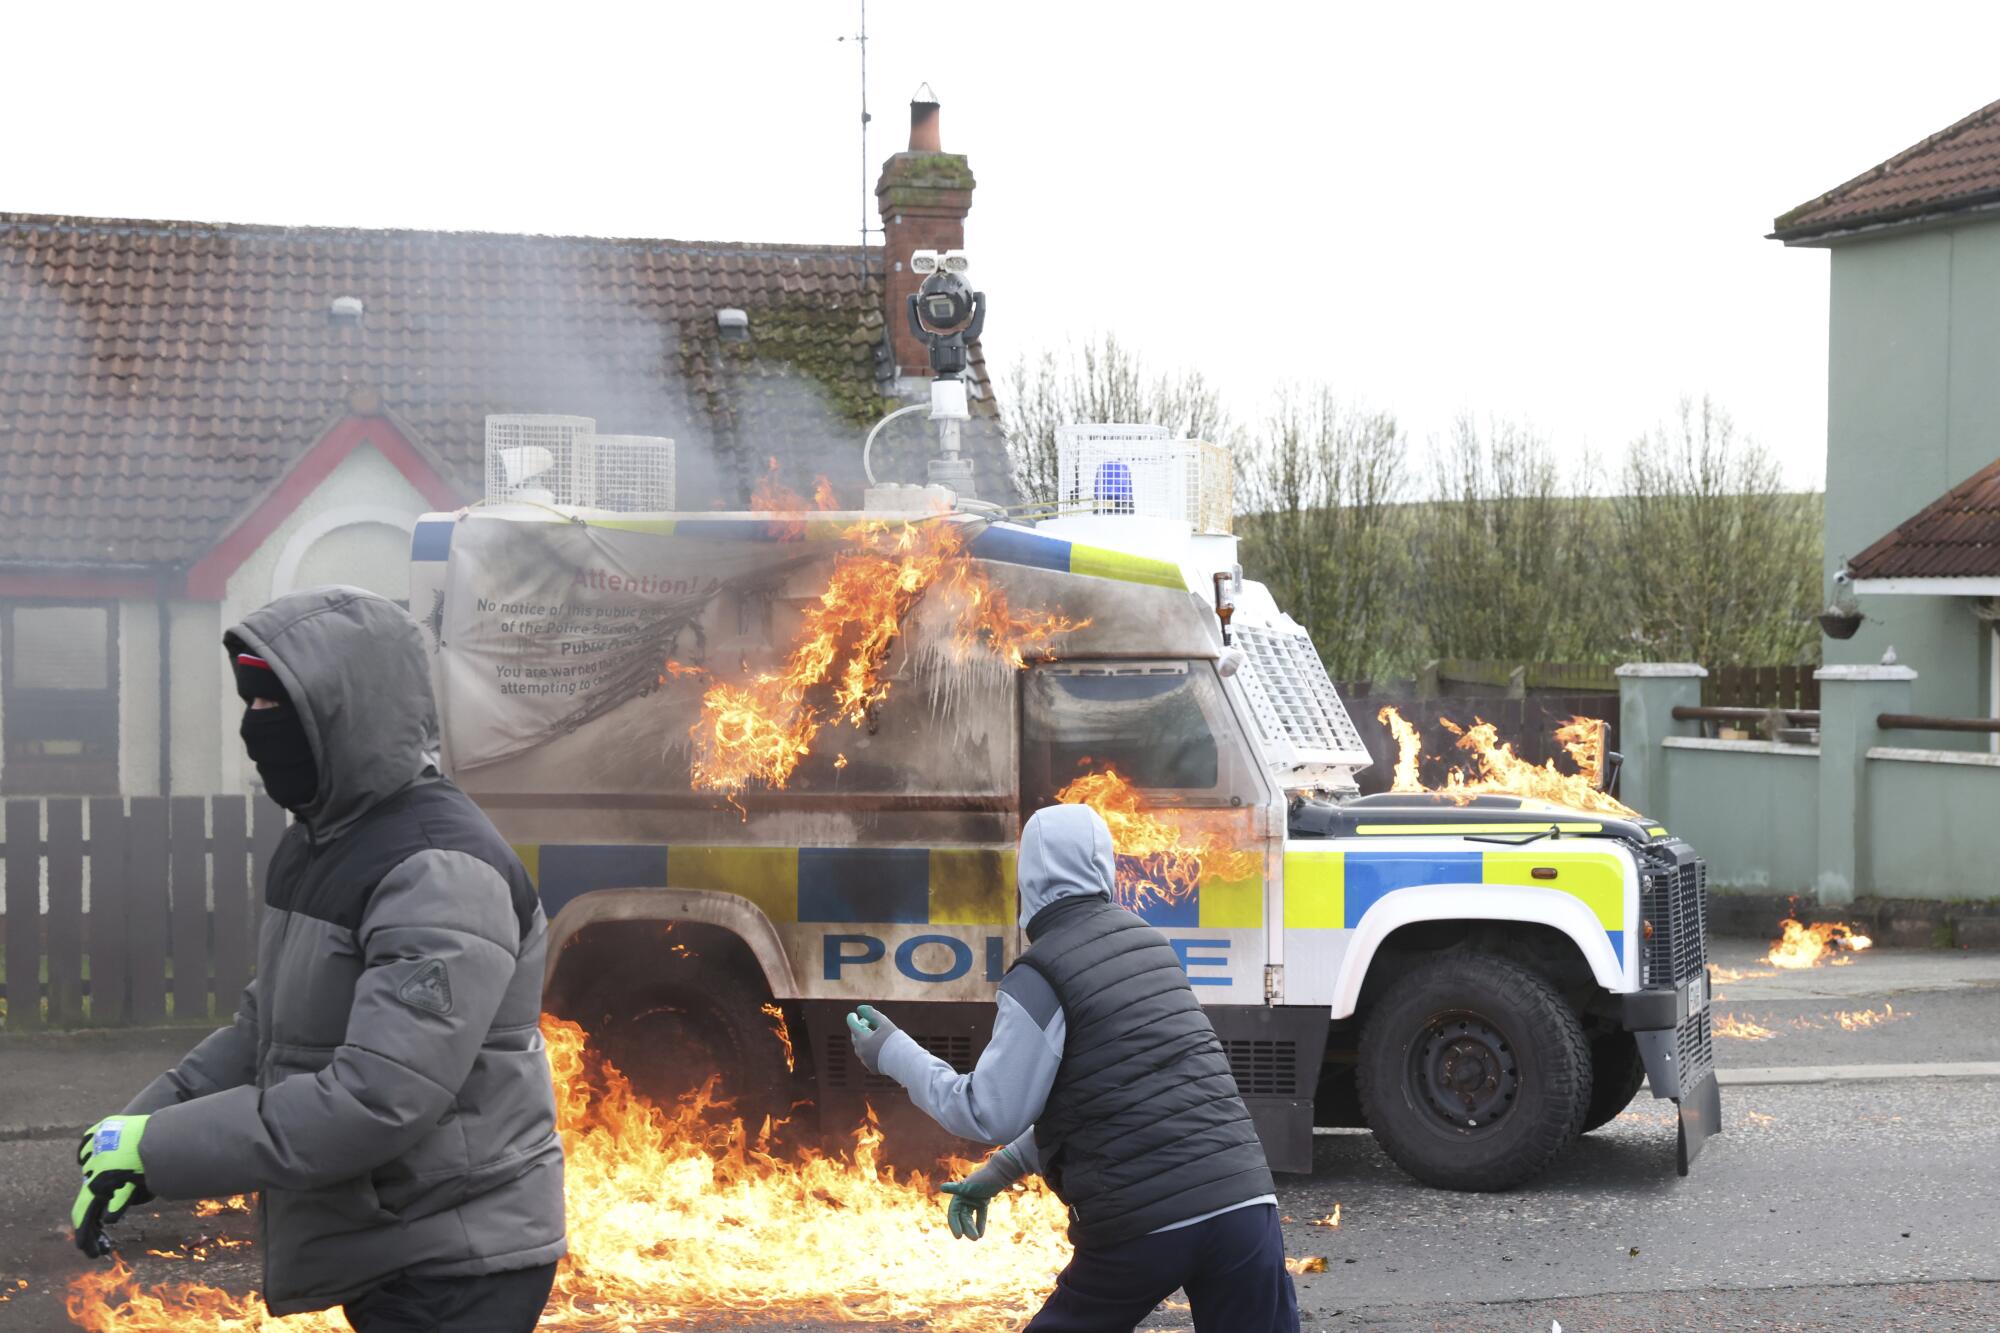 In Northern Ireland, two masked youths throw gas bombs at a police Land Rover, which is starting to burn.